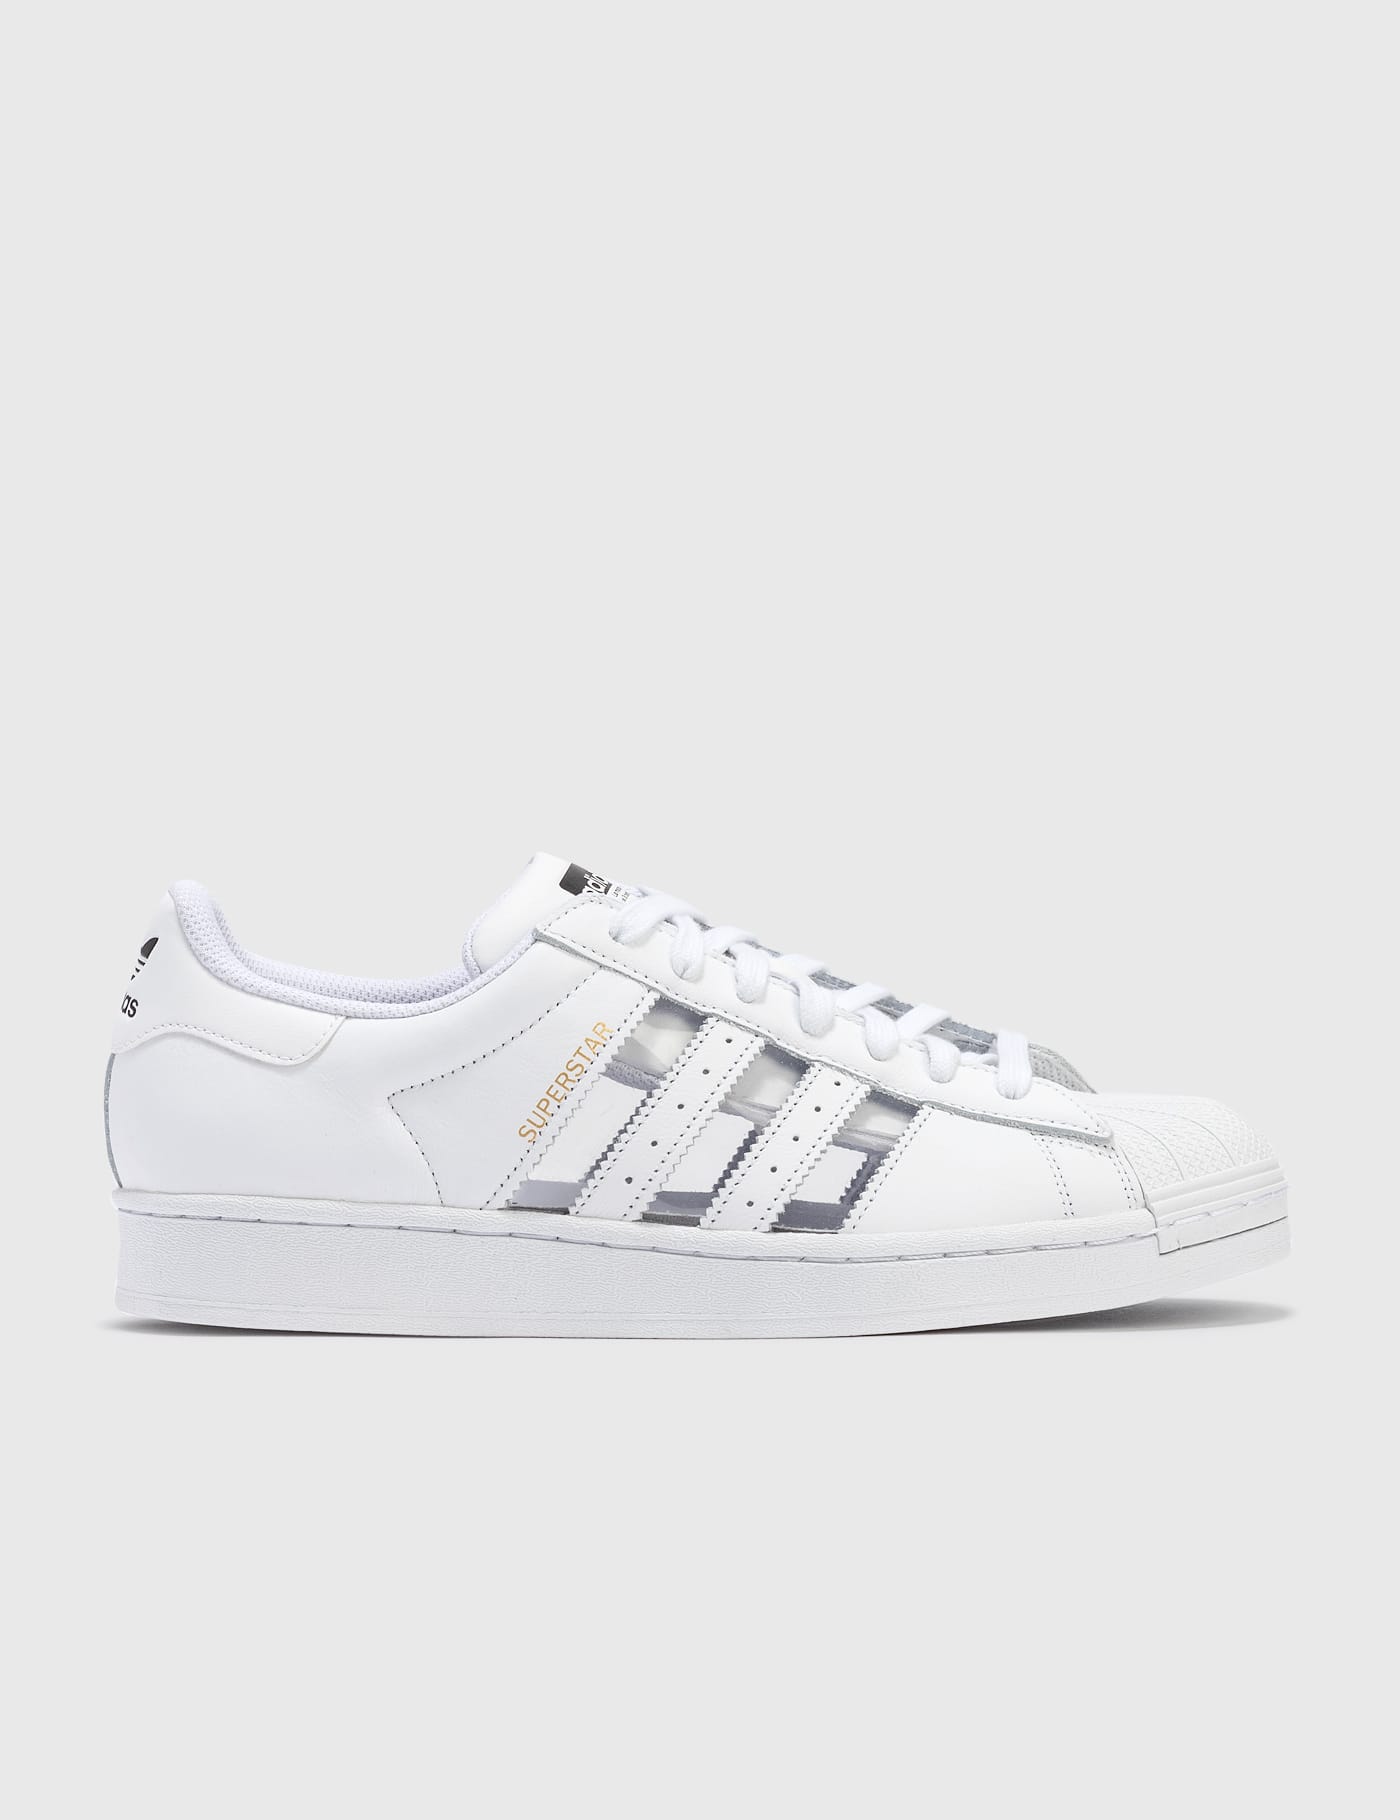 Adidas Originals - Superstar | HBX - Globally Curated Fashion and